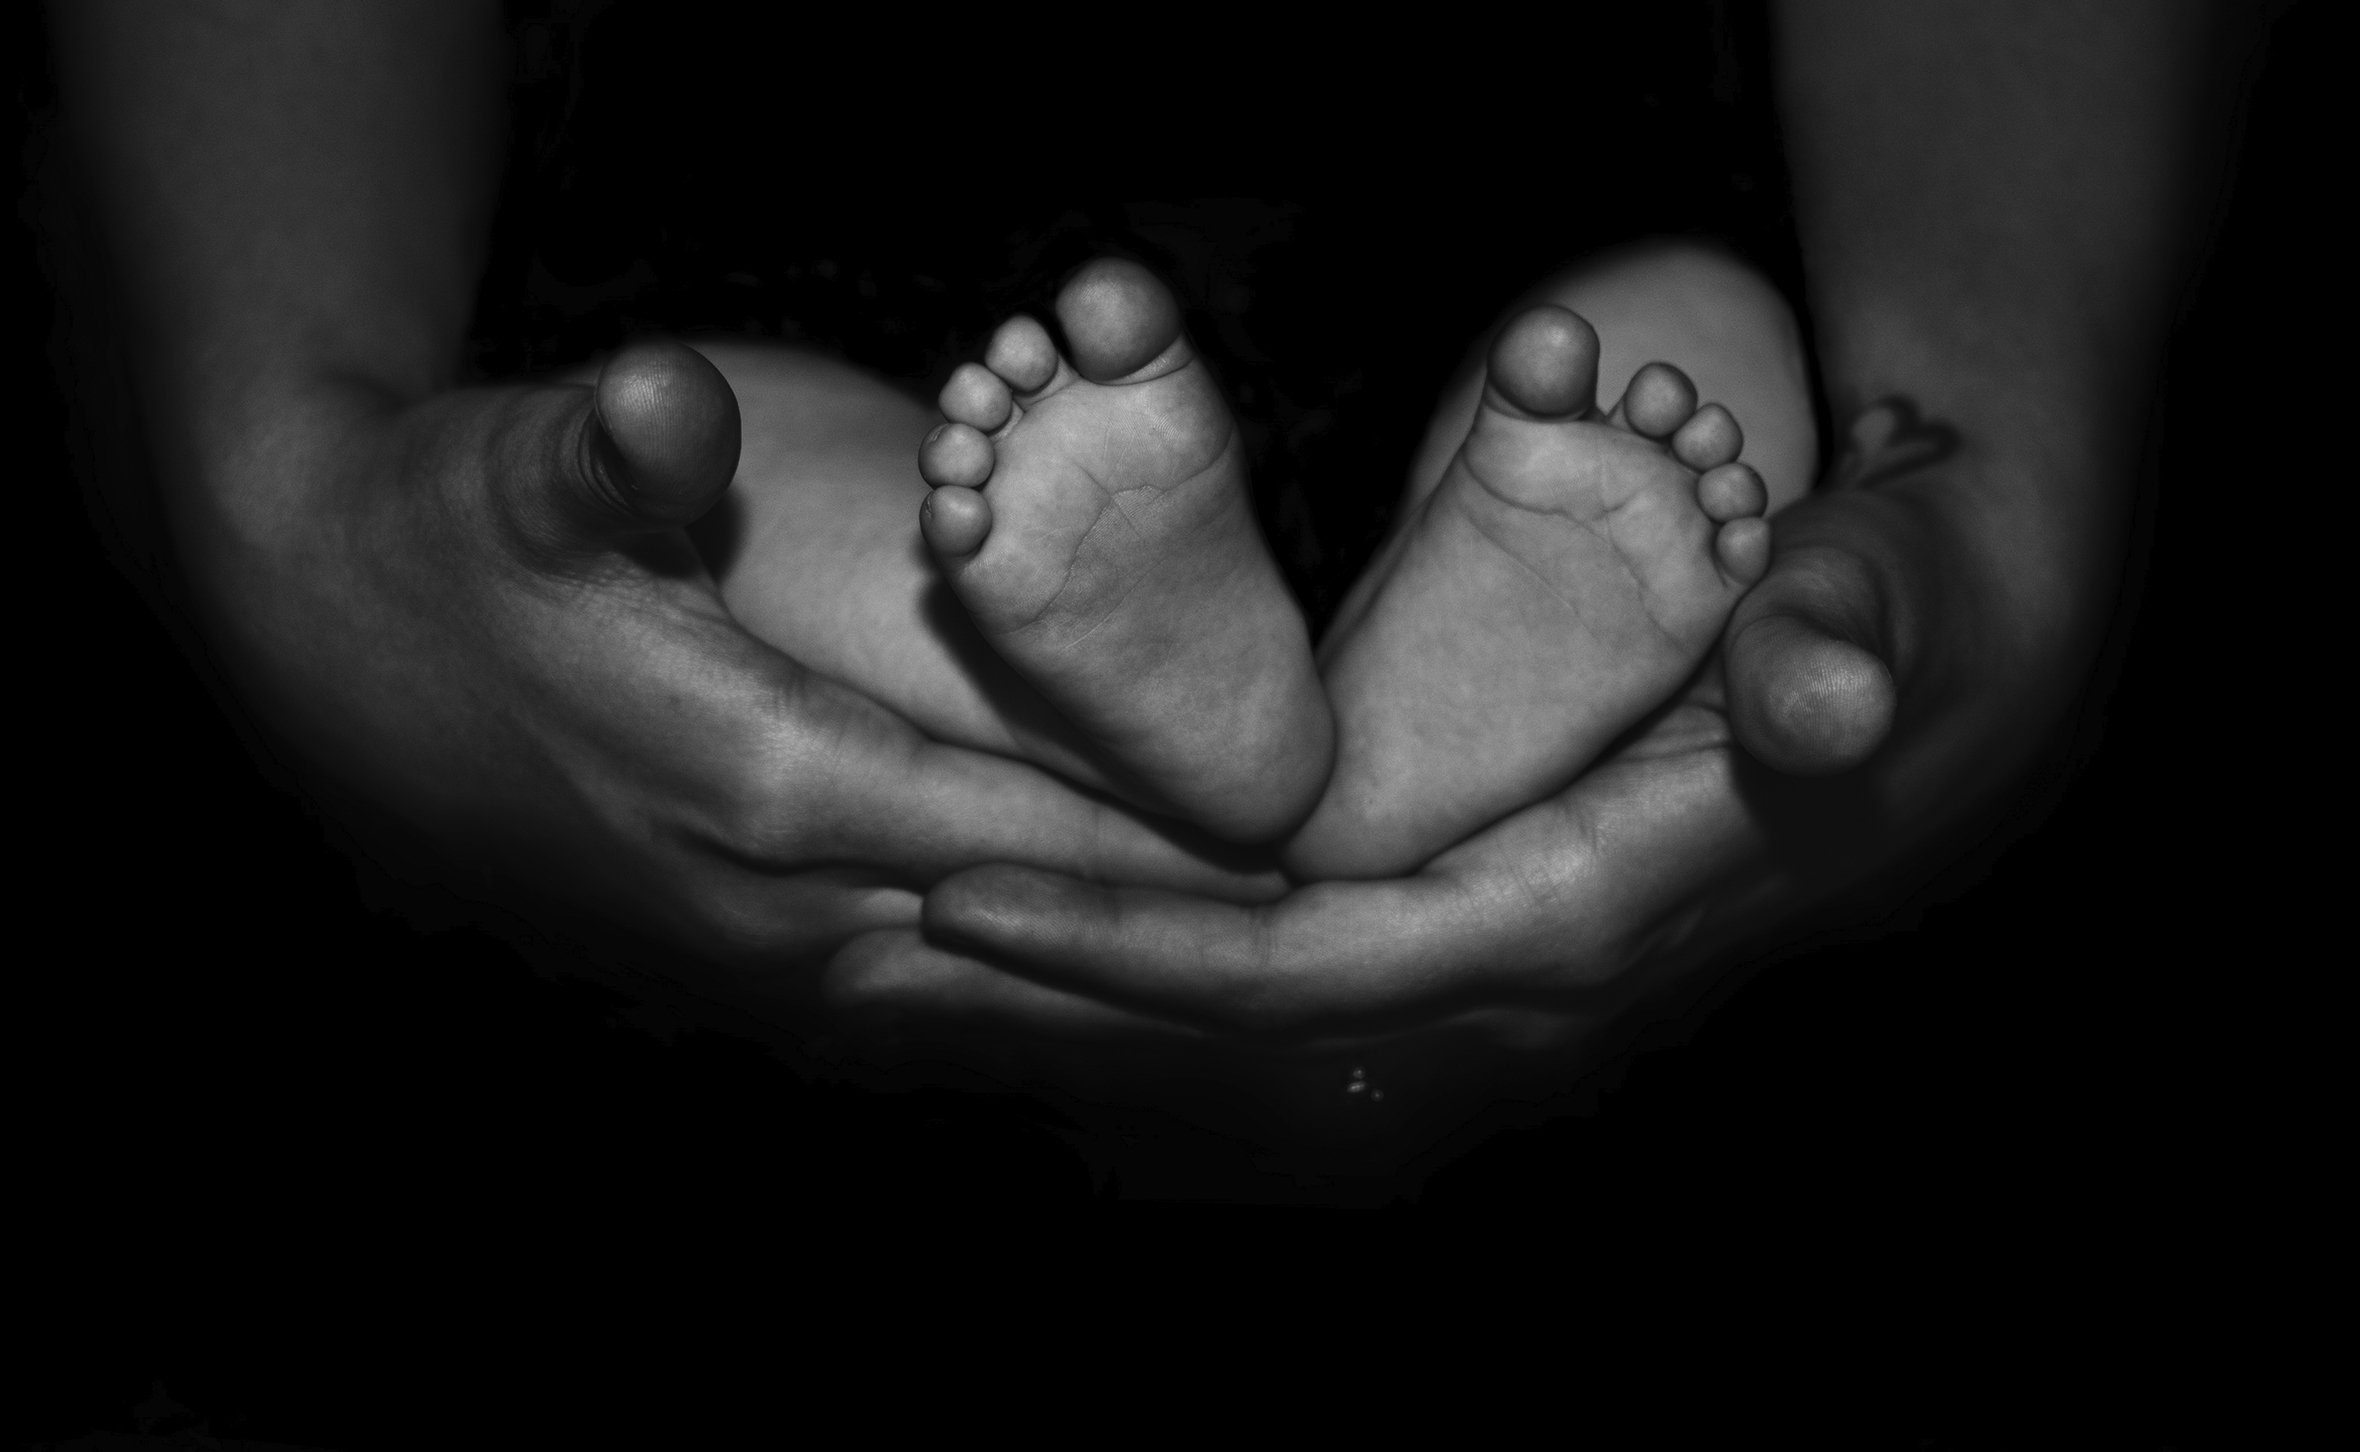 Close-up of a woman’s hands holding an infant’s feet. The soles of the infant’s feet are facing the camera and they are cradled in the woman’s palms.